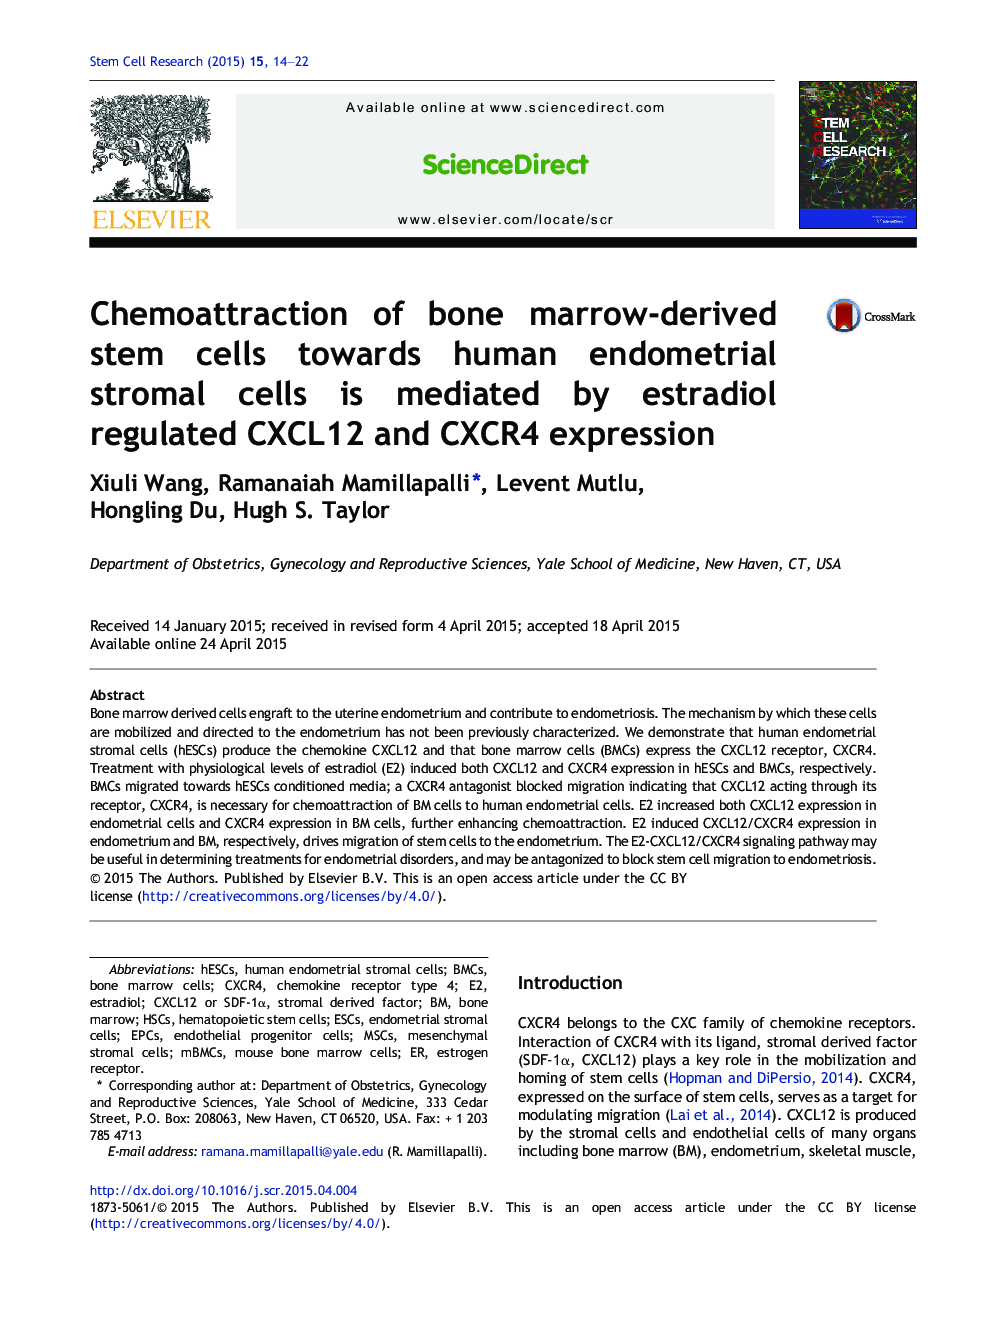 Chemoattraction of bone marrow-derived stem cells towards human endometrial stromal cells is mediated by estradiol regulated CXCL12 and CXCR4 expression